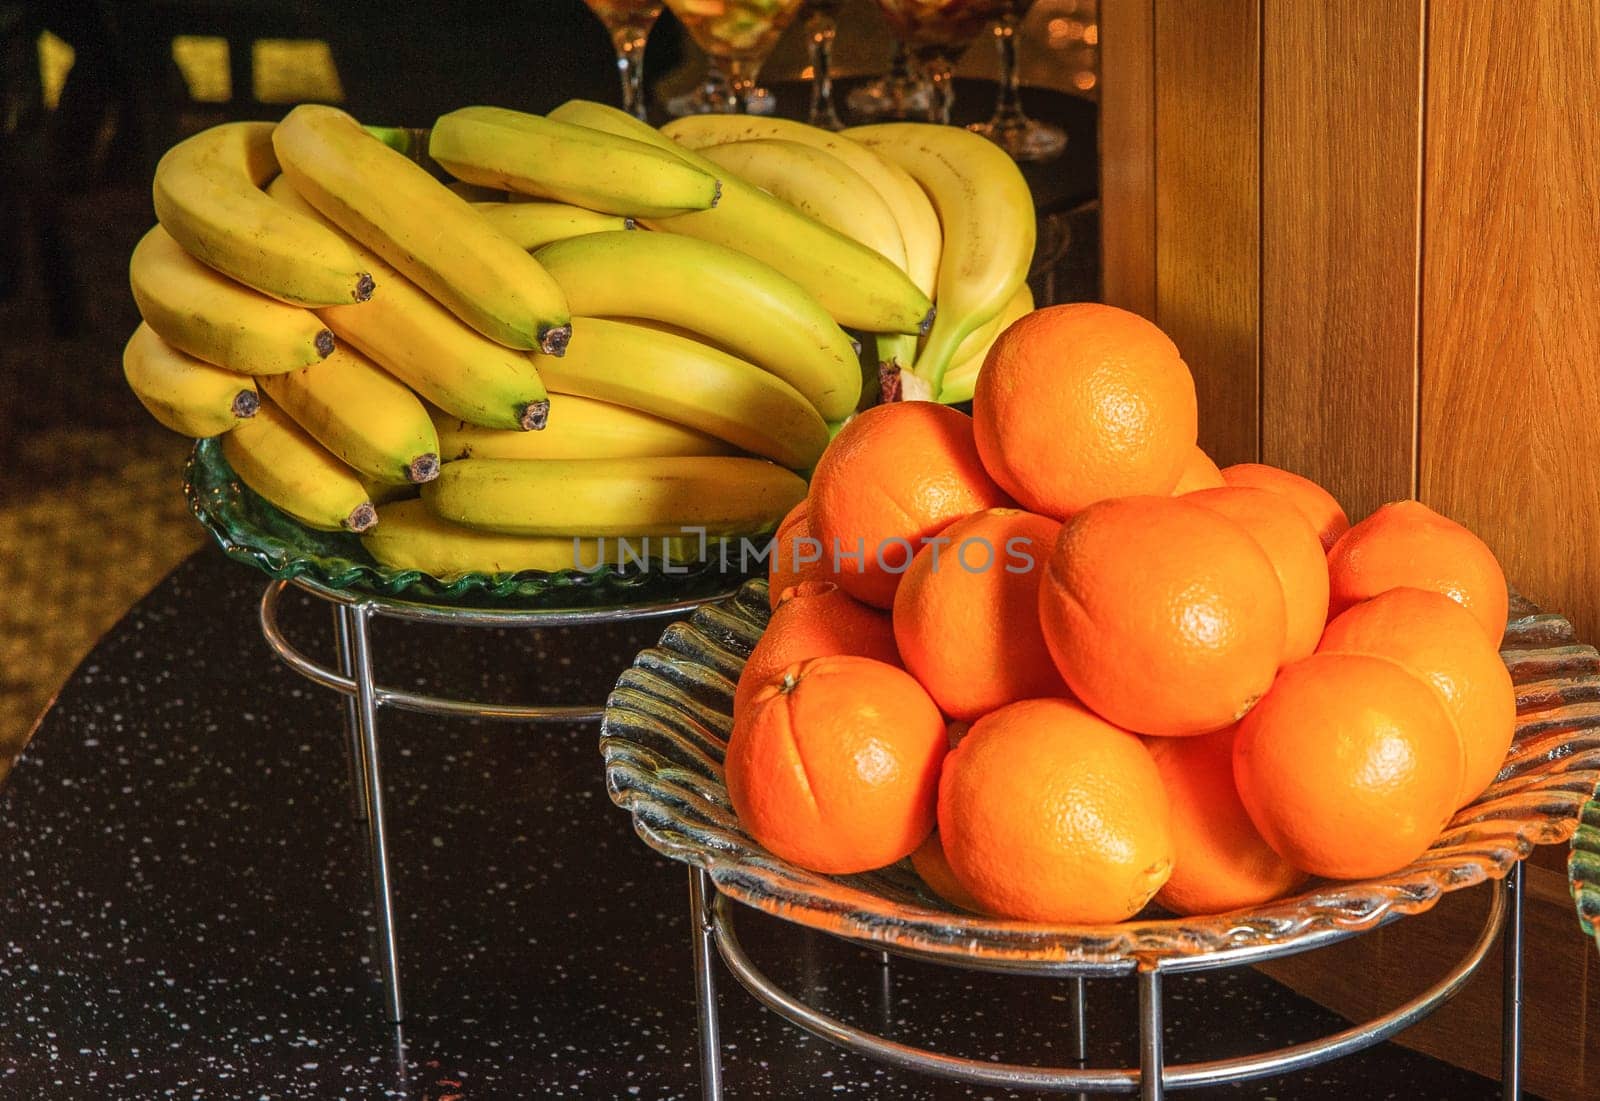 A buffet table with fruit bowls full of bananas and oranges